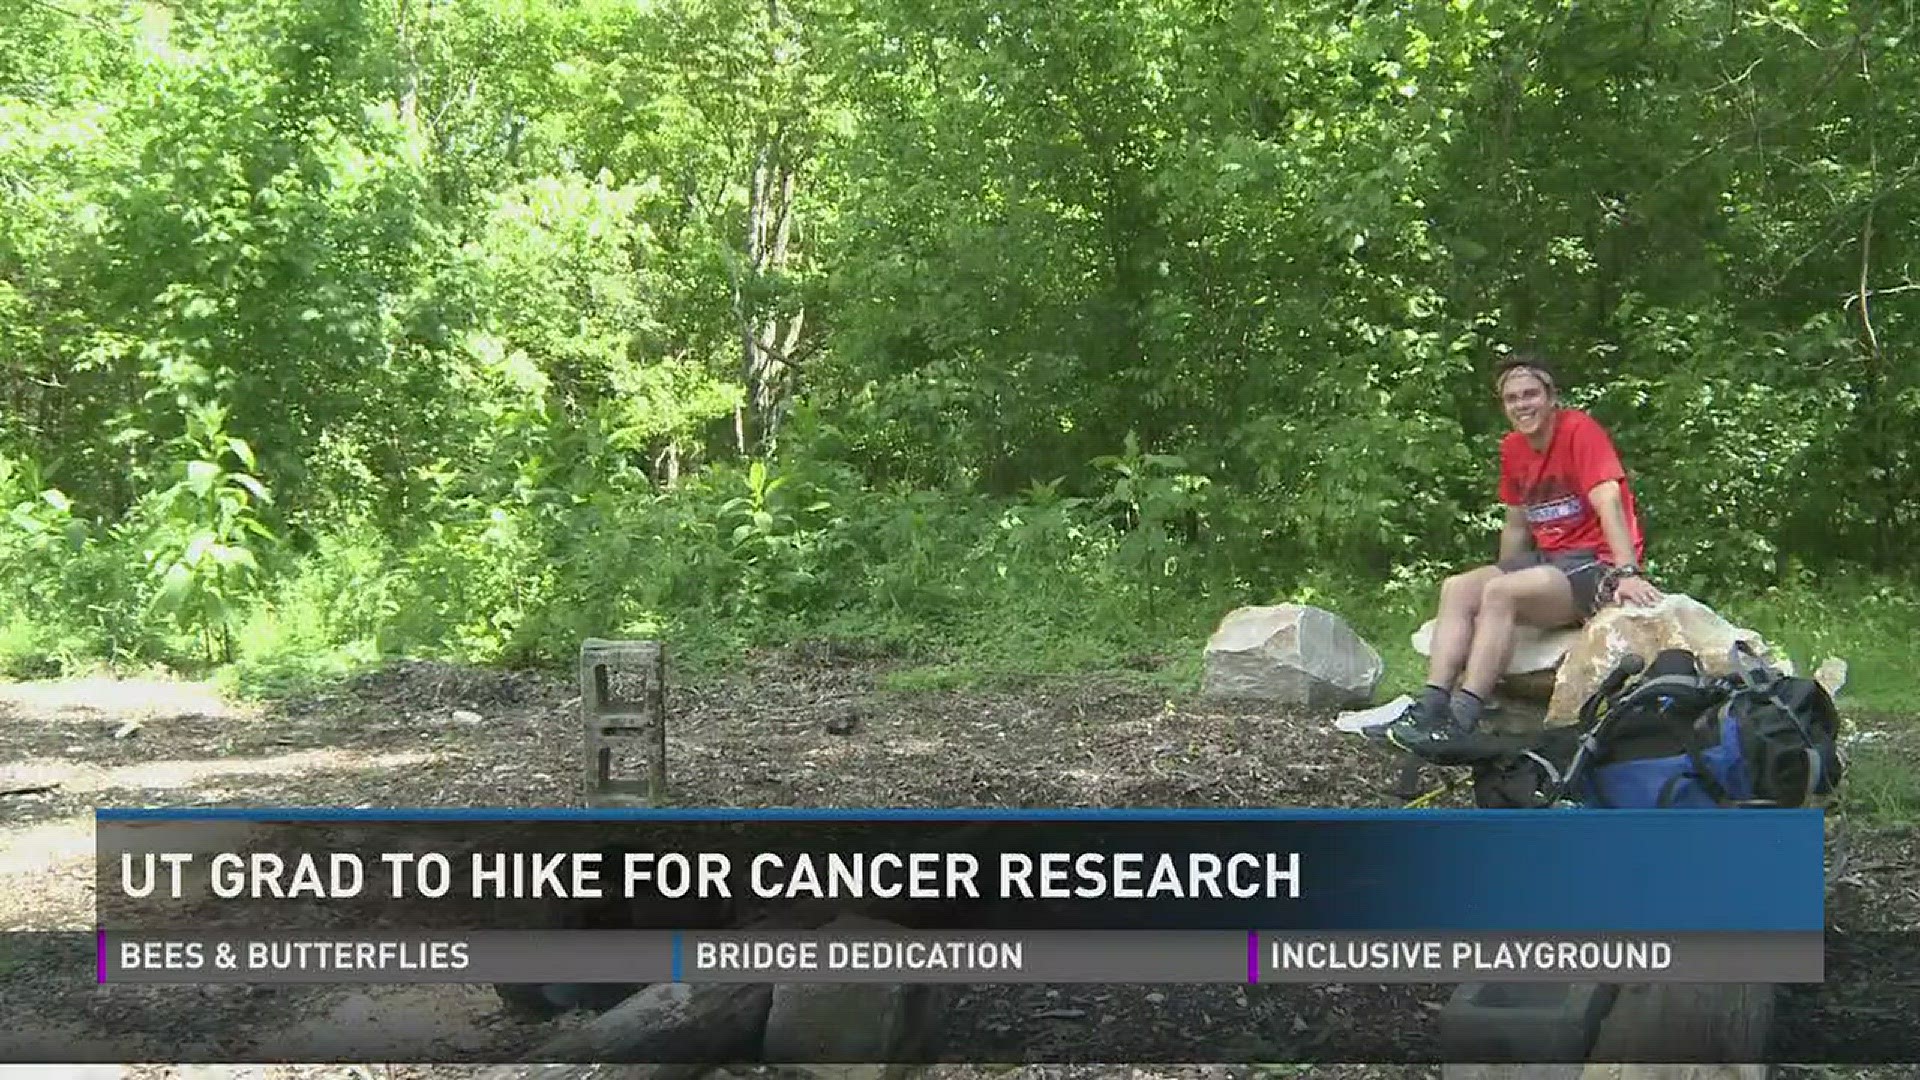 A soon-to-be UT grad will be making a 2,200 mile trek down the AT to raise money for cancer research and to honor his father.